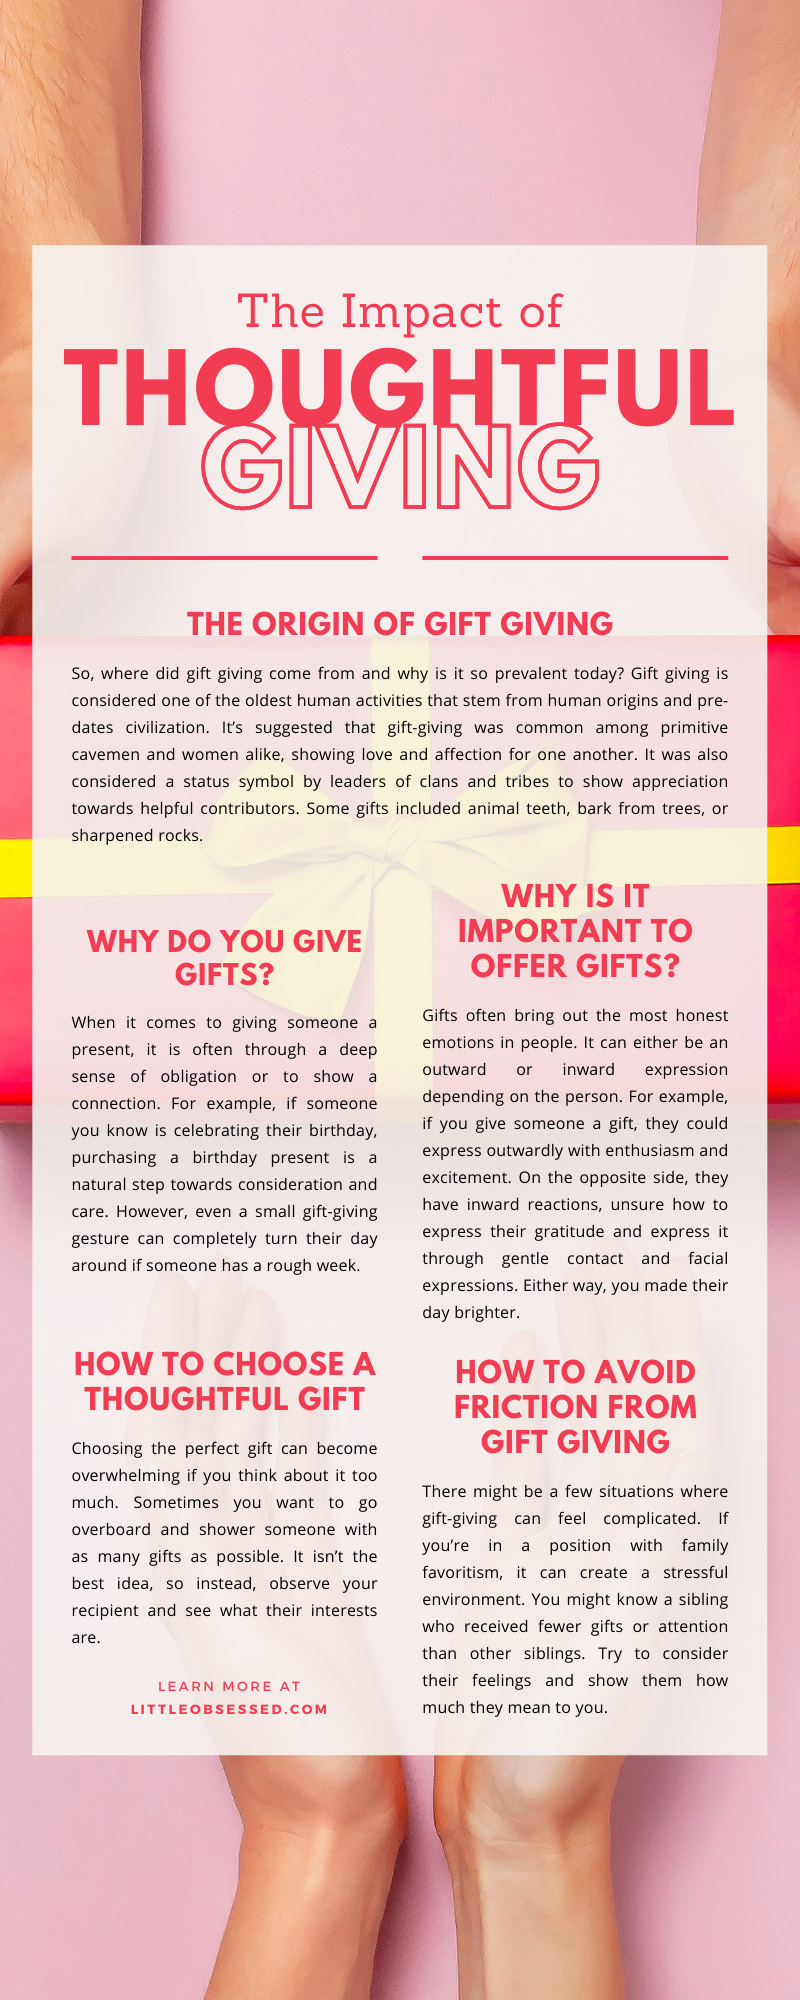 The Impact of Thoughtful Giving